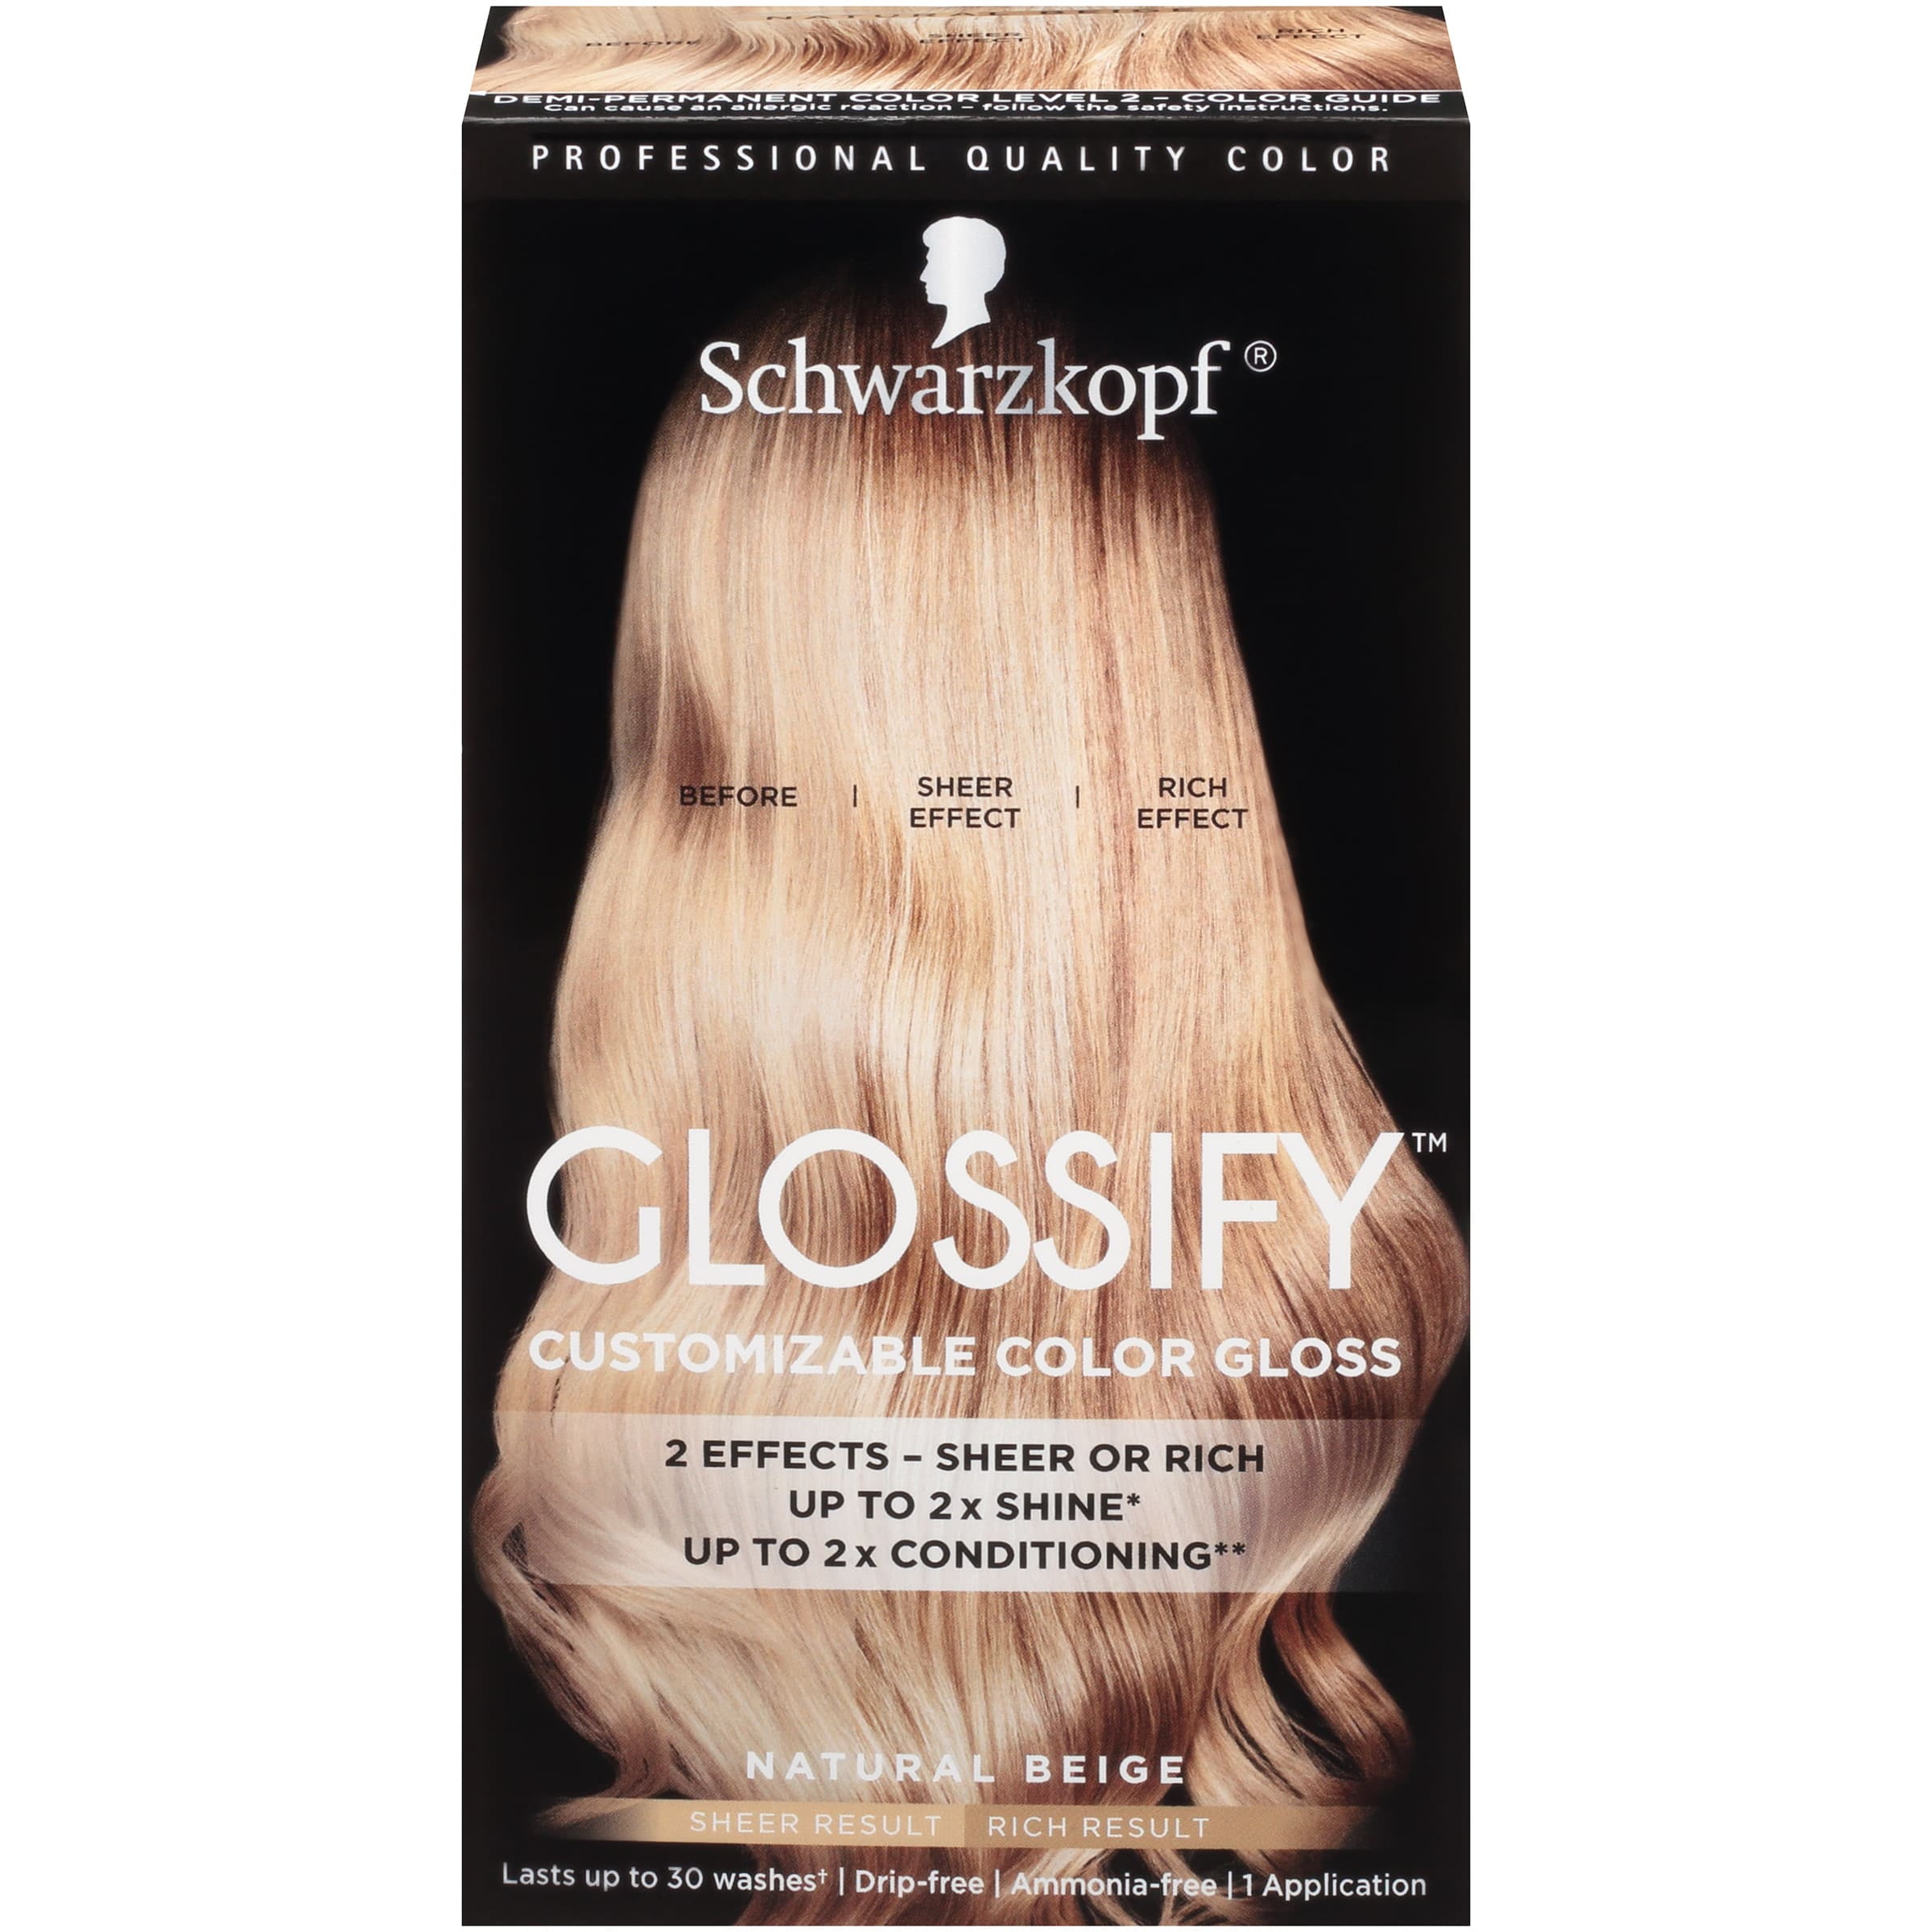 Schwarzkopf Glossify Customizable Color Gloss, Natural Beige